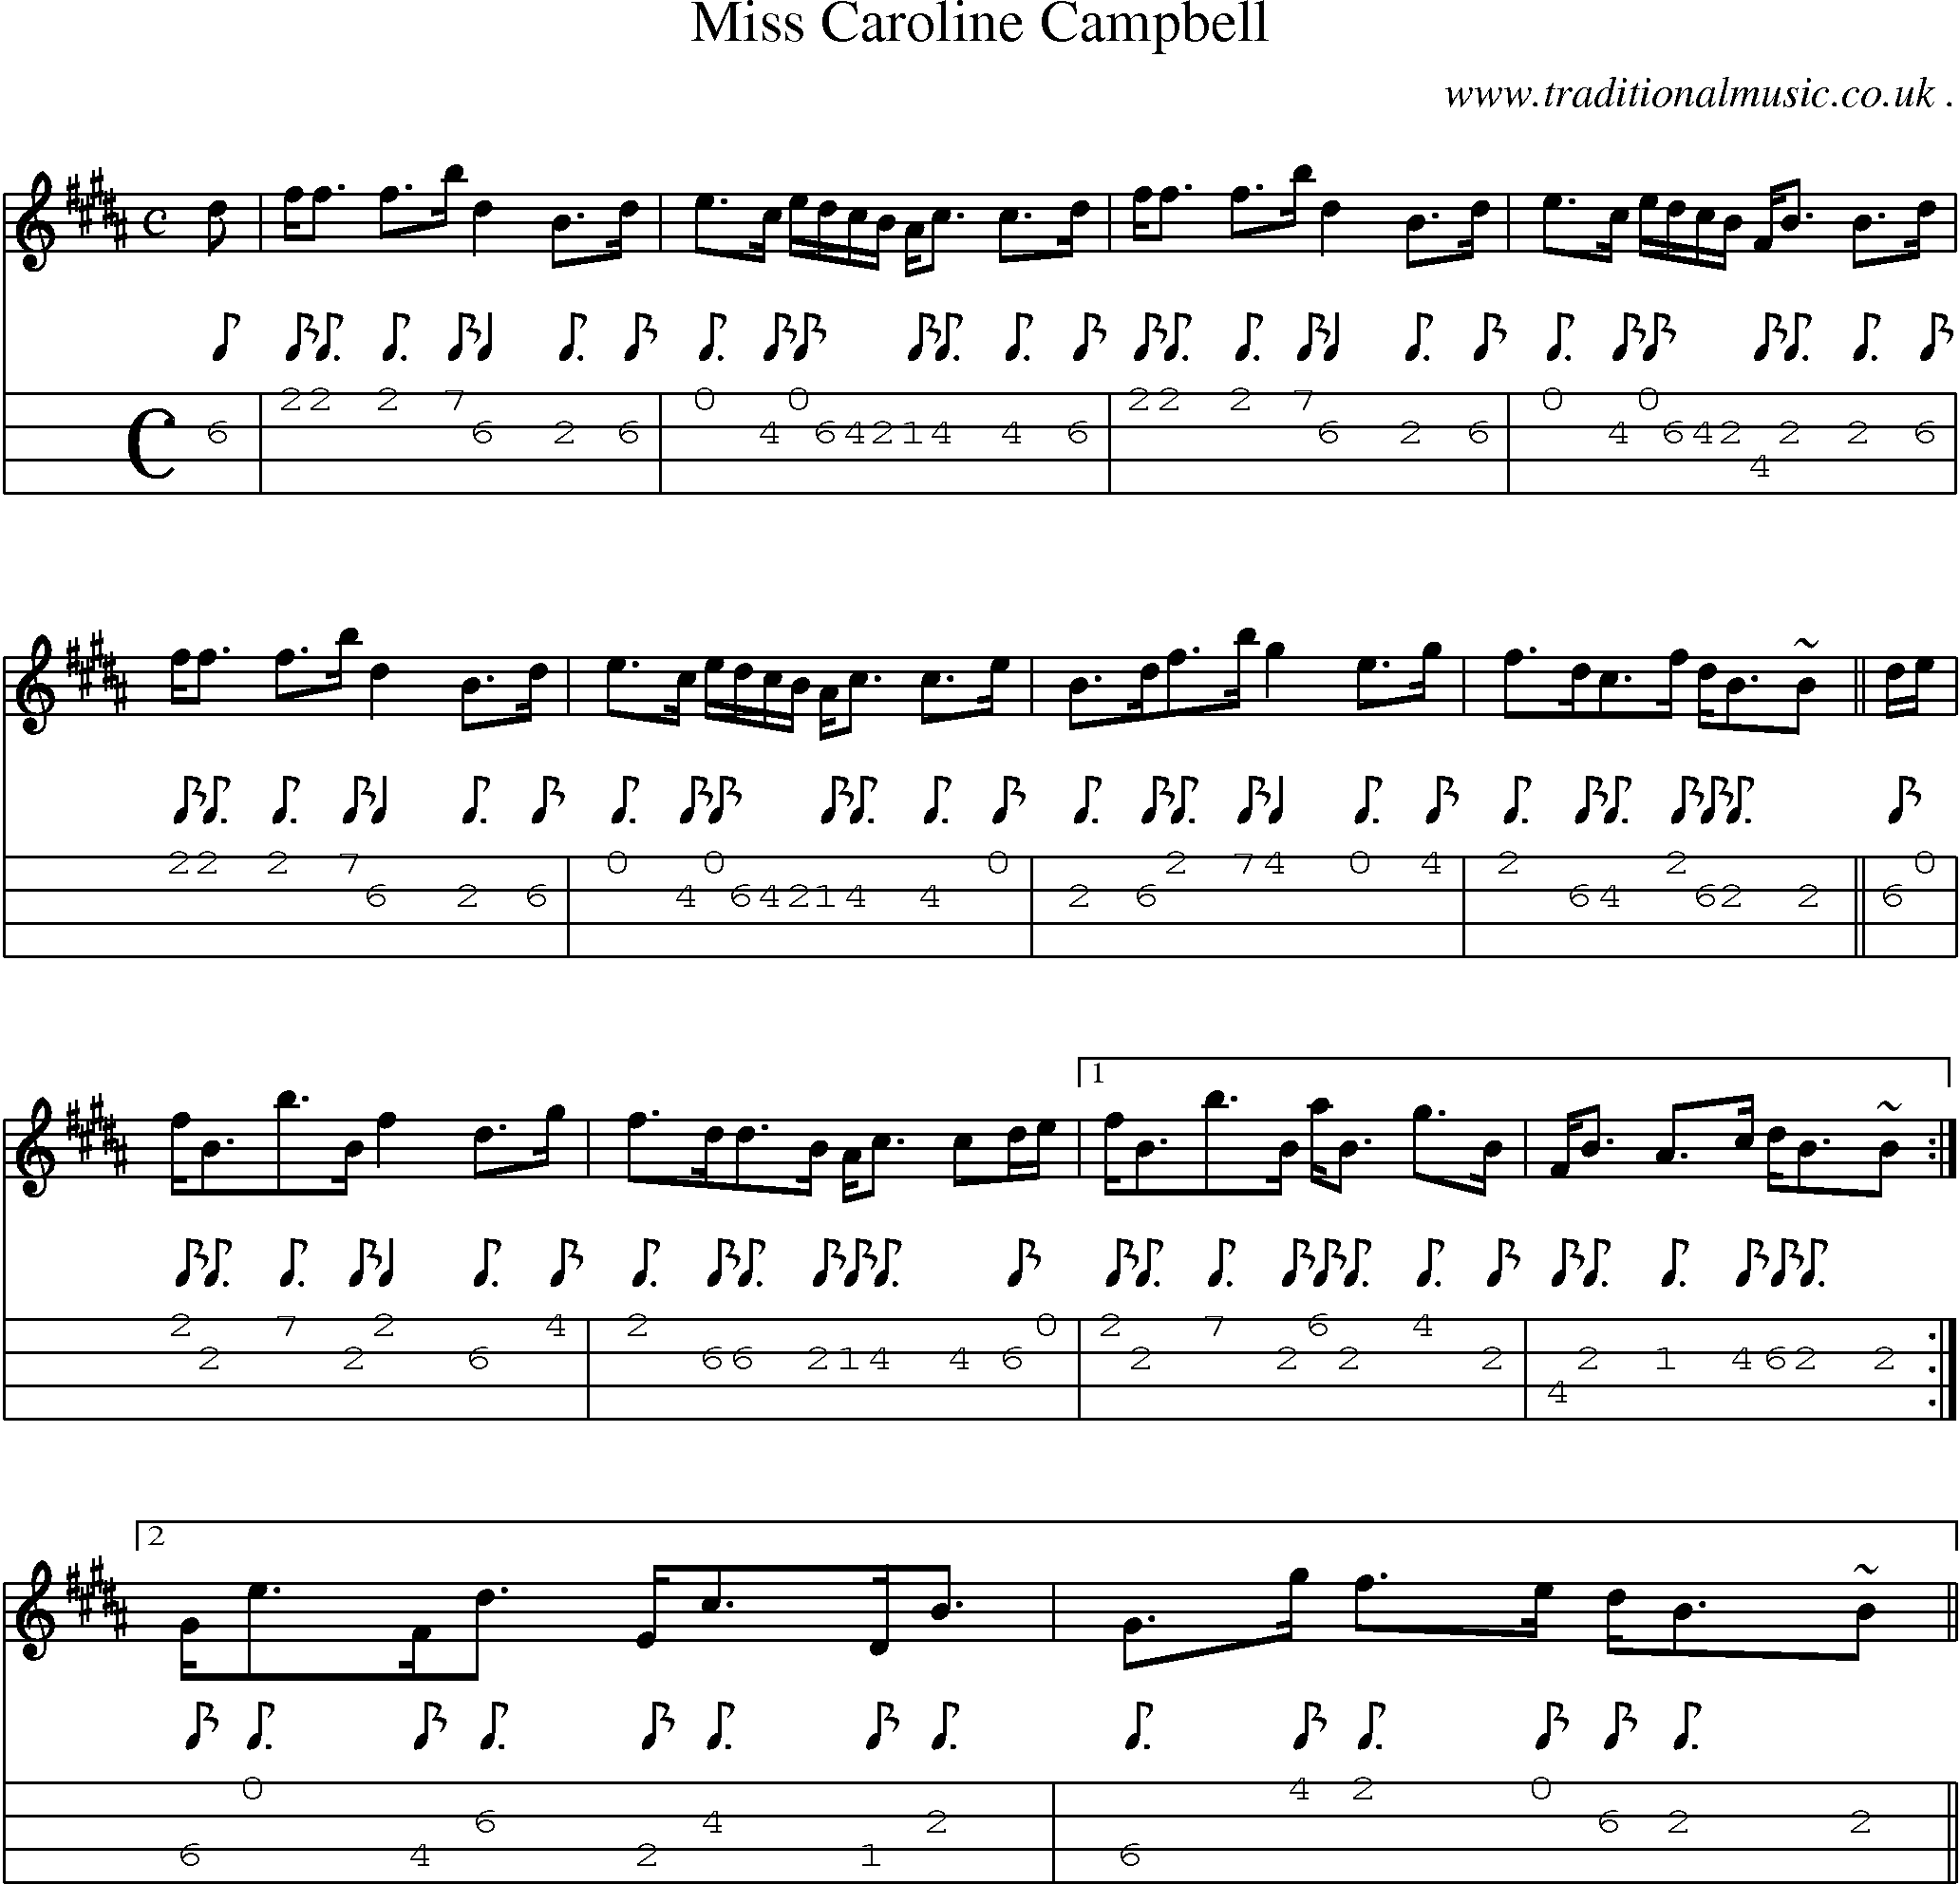 Sheet-music  score, Chords and Mandolin Tabs for Miss Caroline Campbell